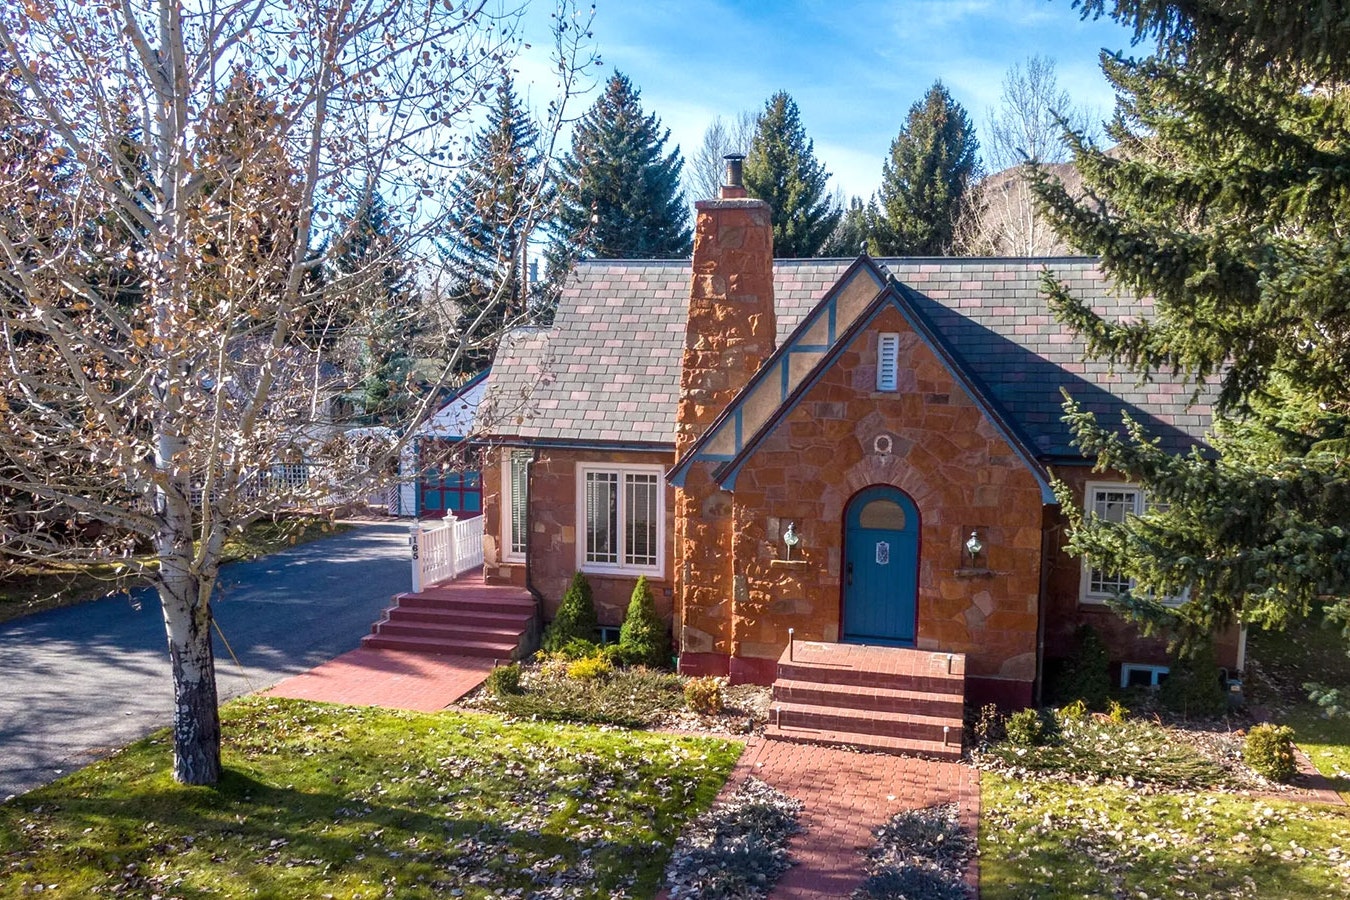 This 1,000-square-foot home in downtown Jackson, Wyoming, lists for $4 million. Its real value, however, is its land and location.